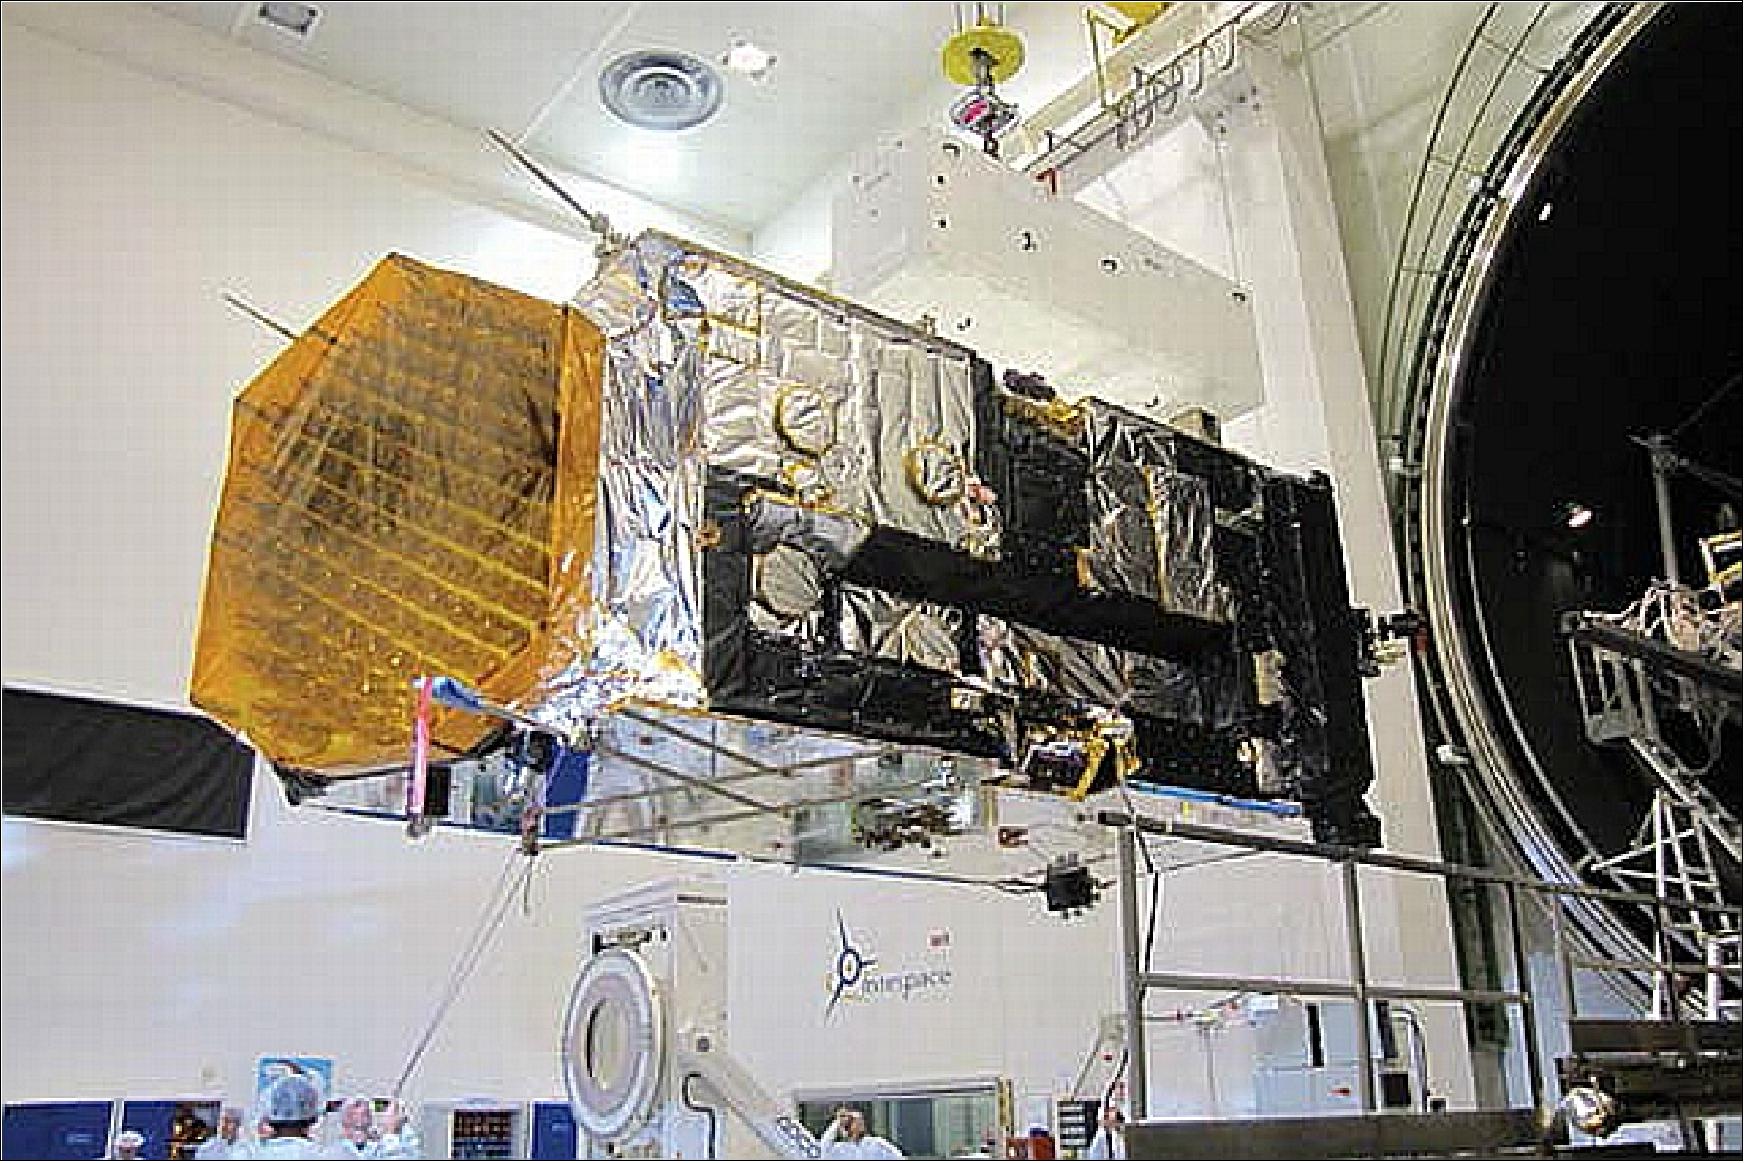 Figure 11: The Alphasat spacecraft entering the thermal vacuum chamber in Toulouse in late November 2012 (image credit: Intespace) 20) 21)